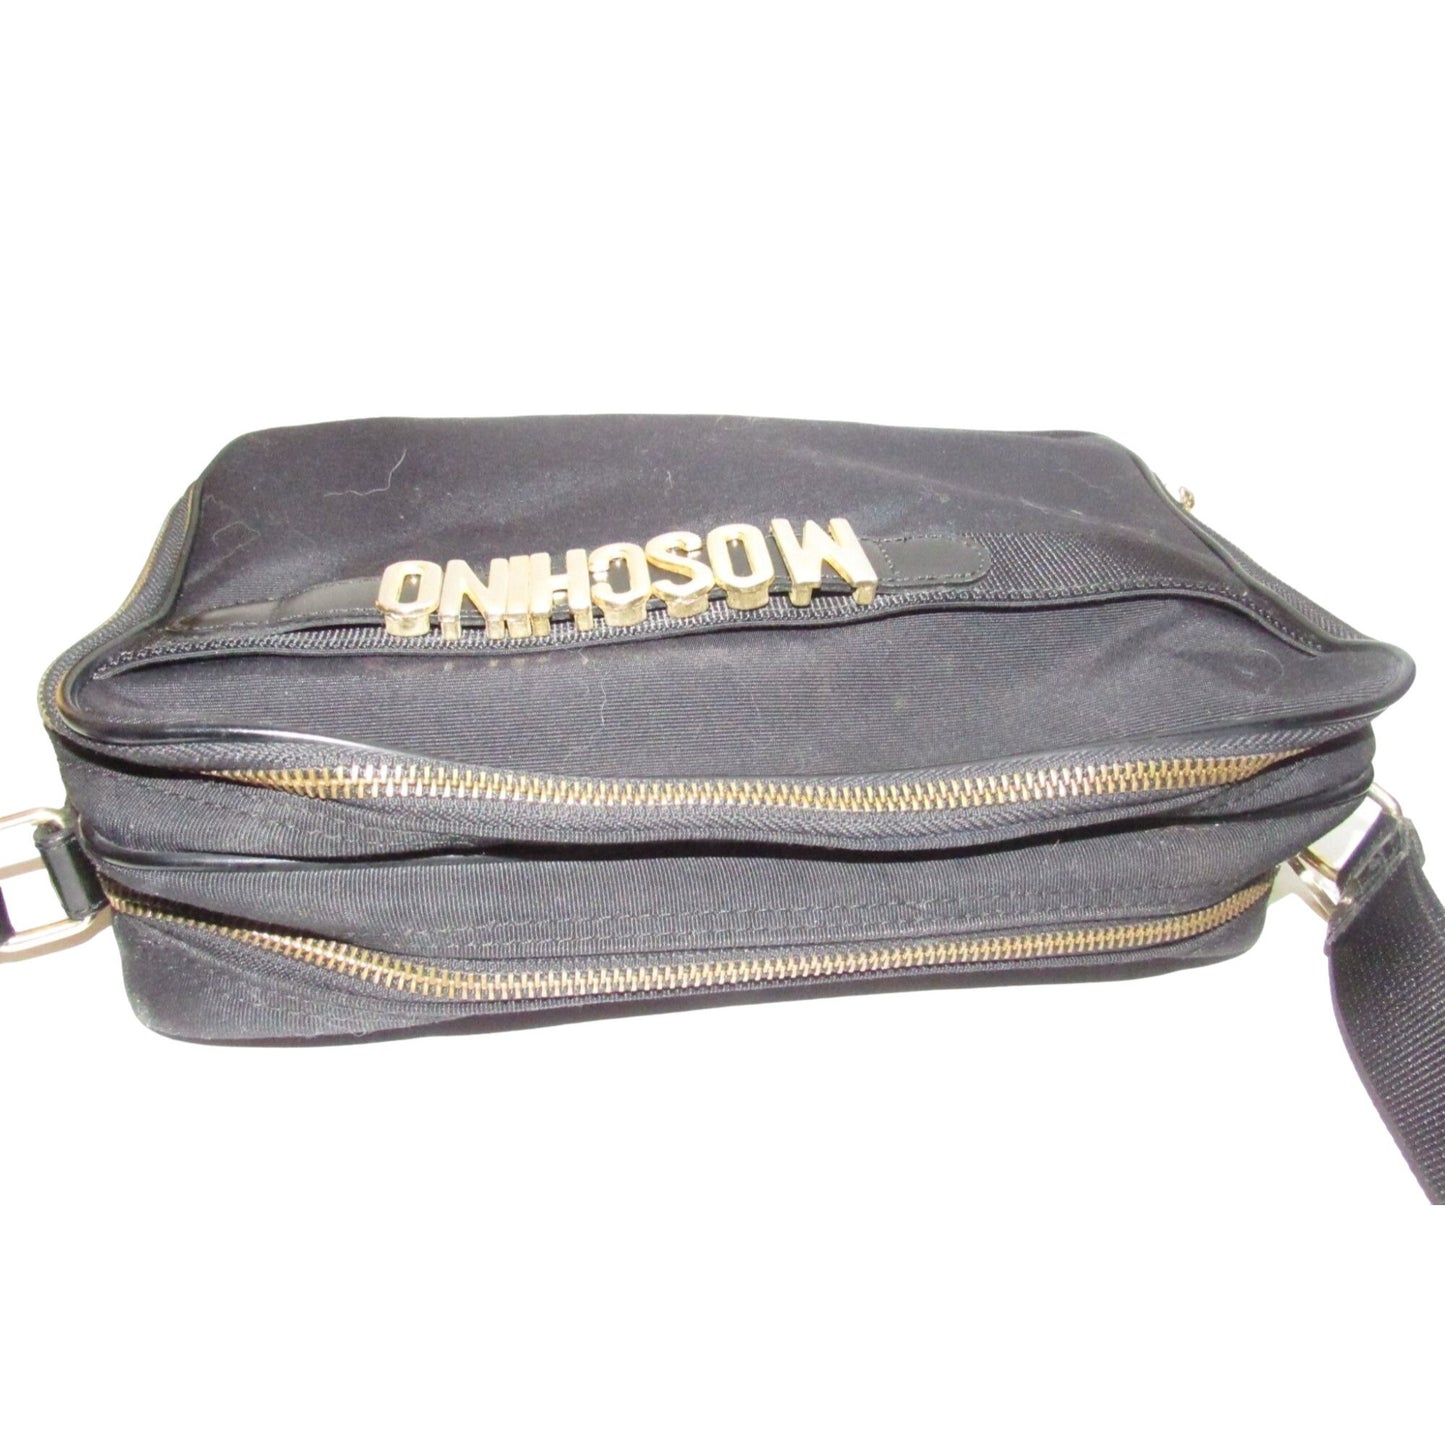 Moschino, black canvas & leather, cross body with a zip top, bold, gold, MOSCHINO letter accents, & a long strap with snaps on both sides